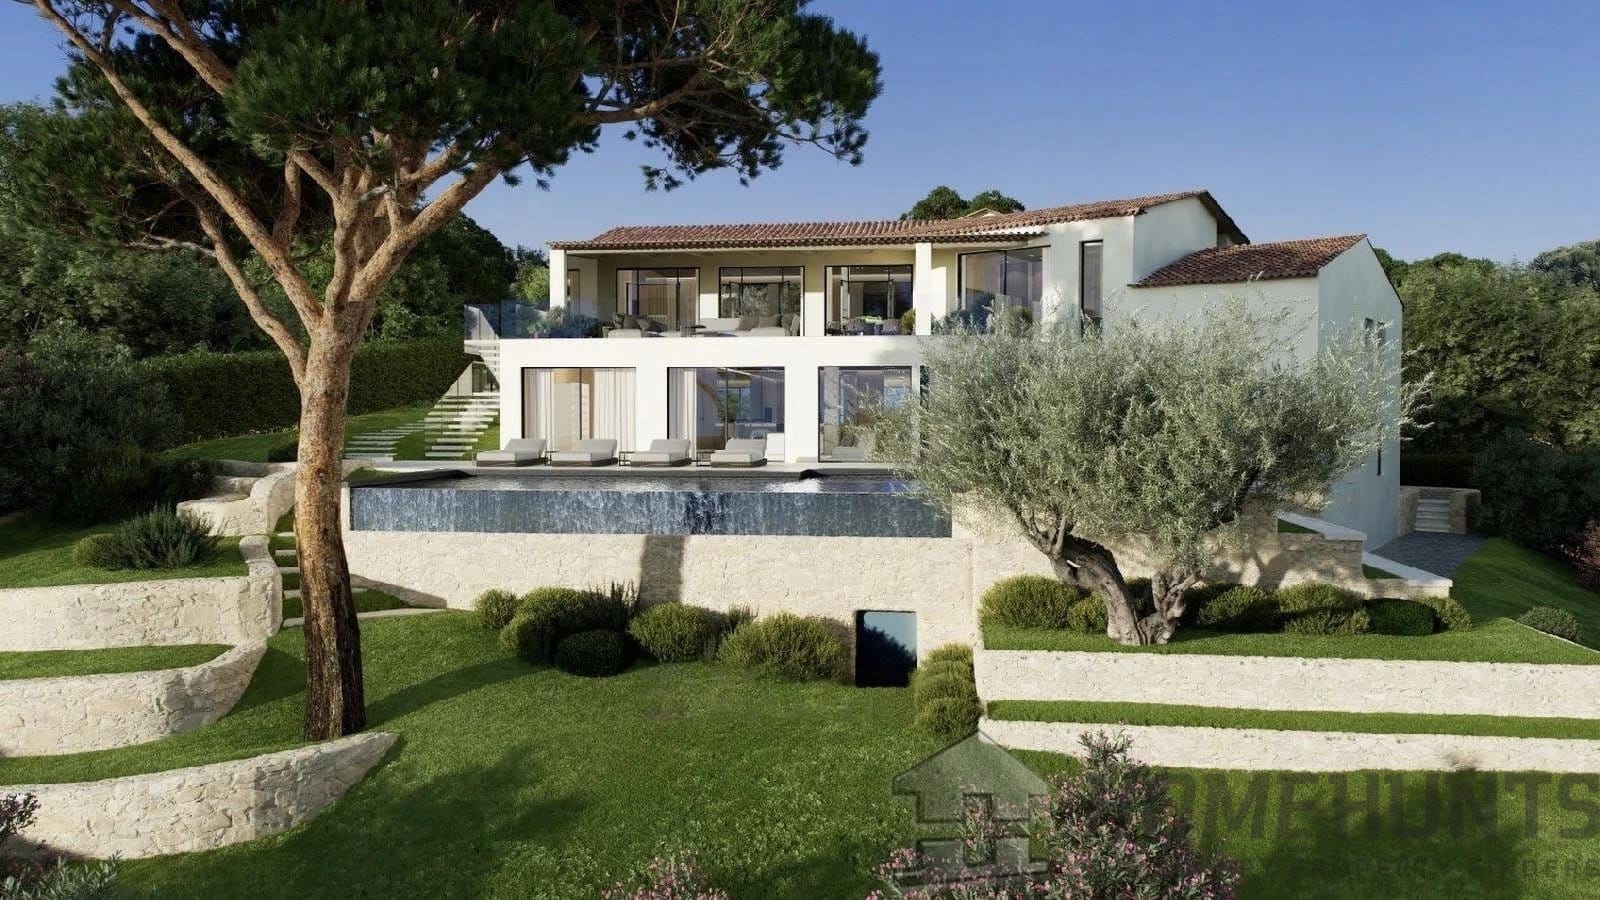 Villa/House For Sale in Cannes 4